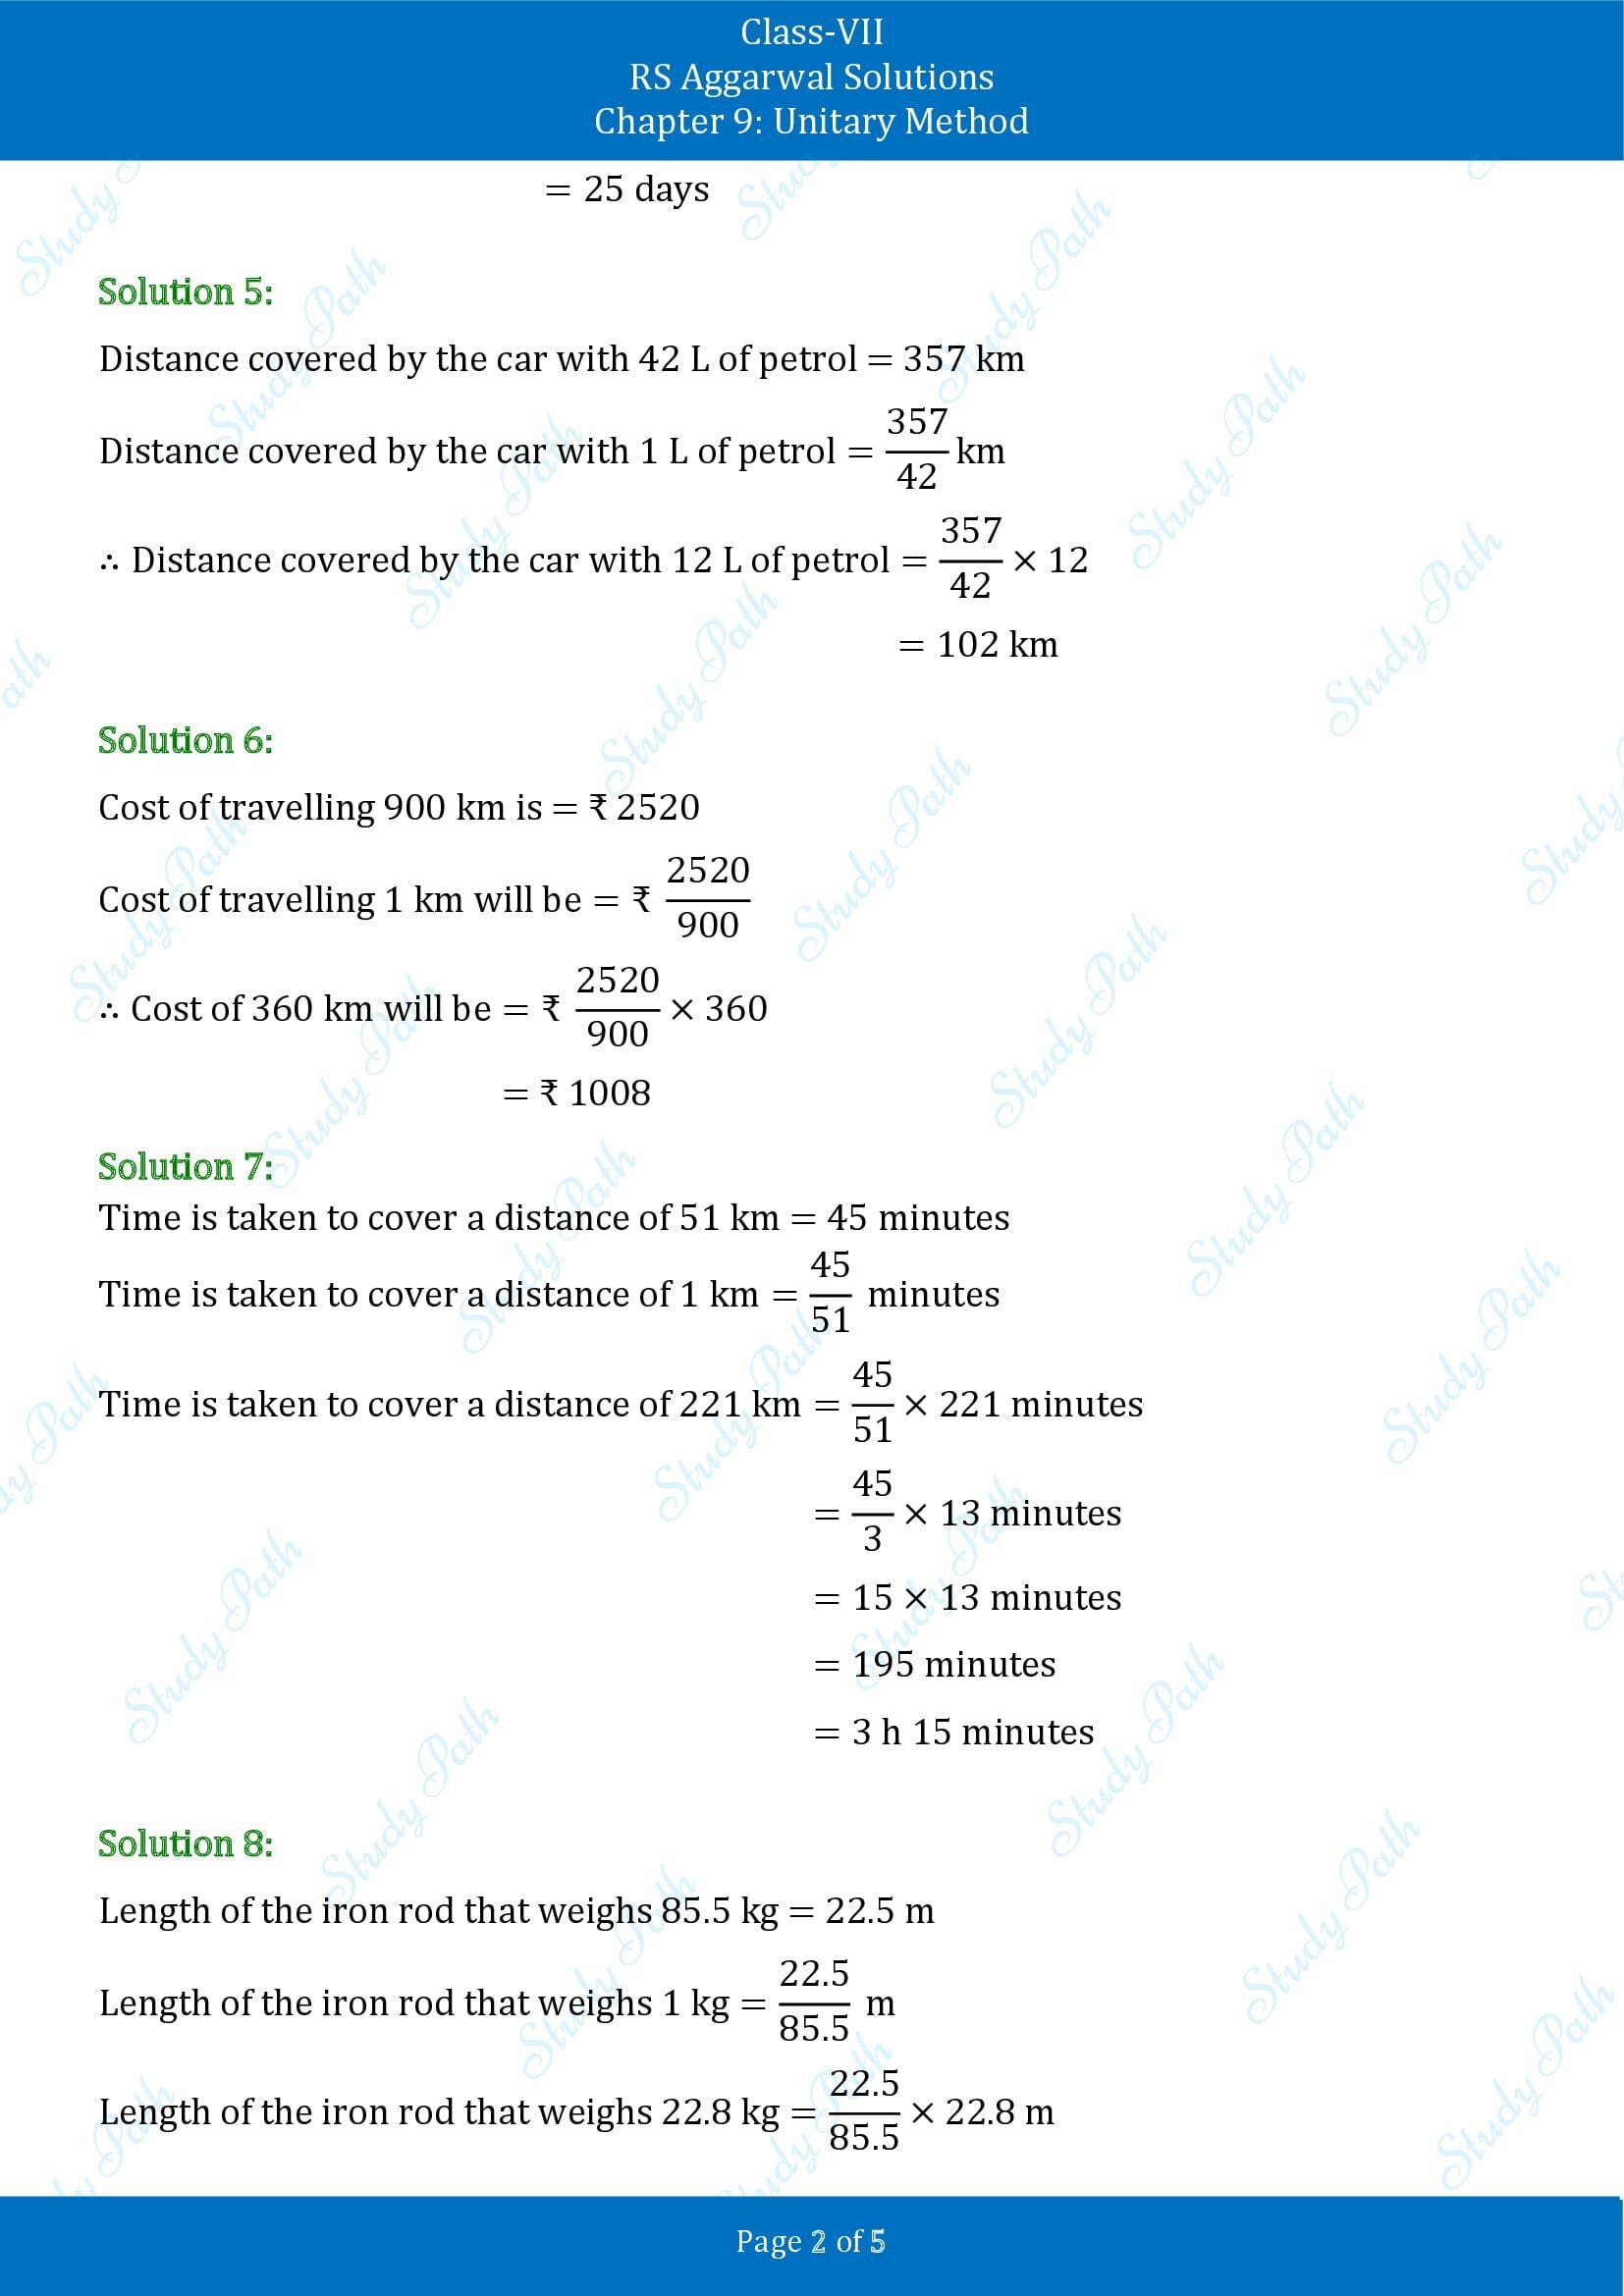 RS Aggarwal Solutions Class 7 Chapter 9 Unitary Method Exercise 9A 00002